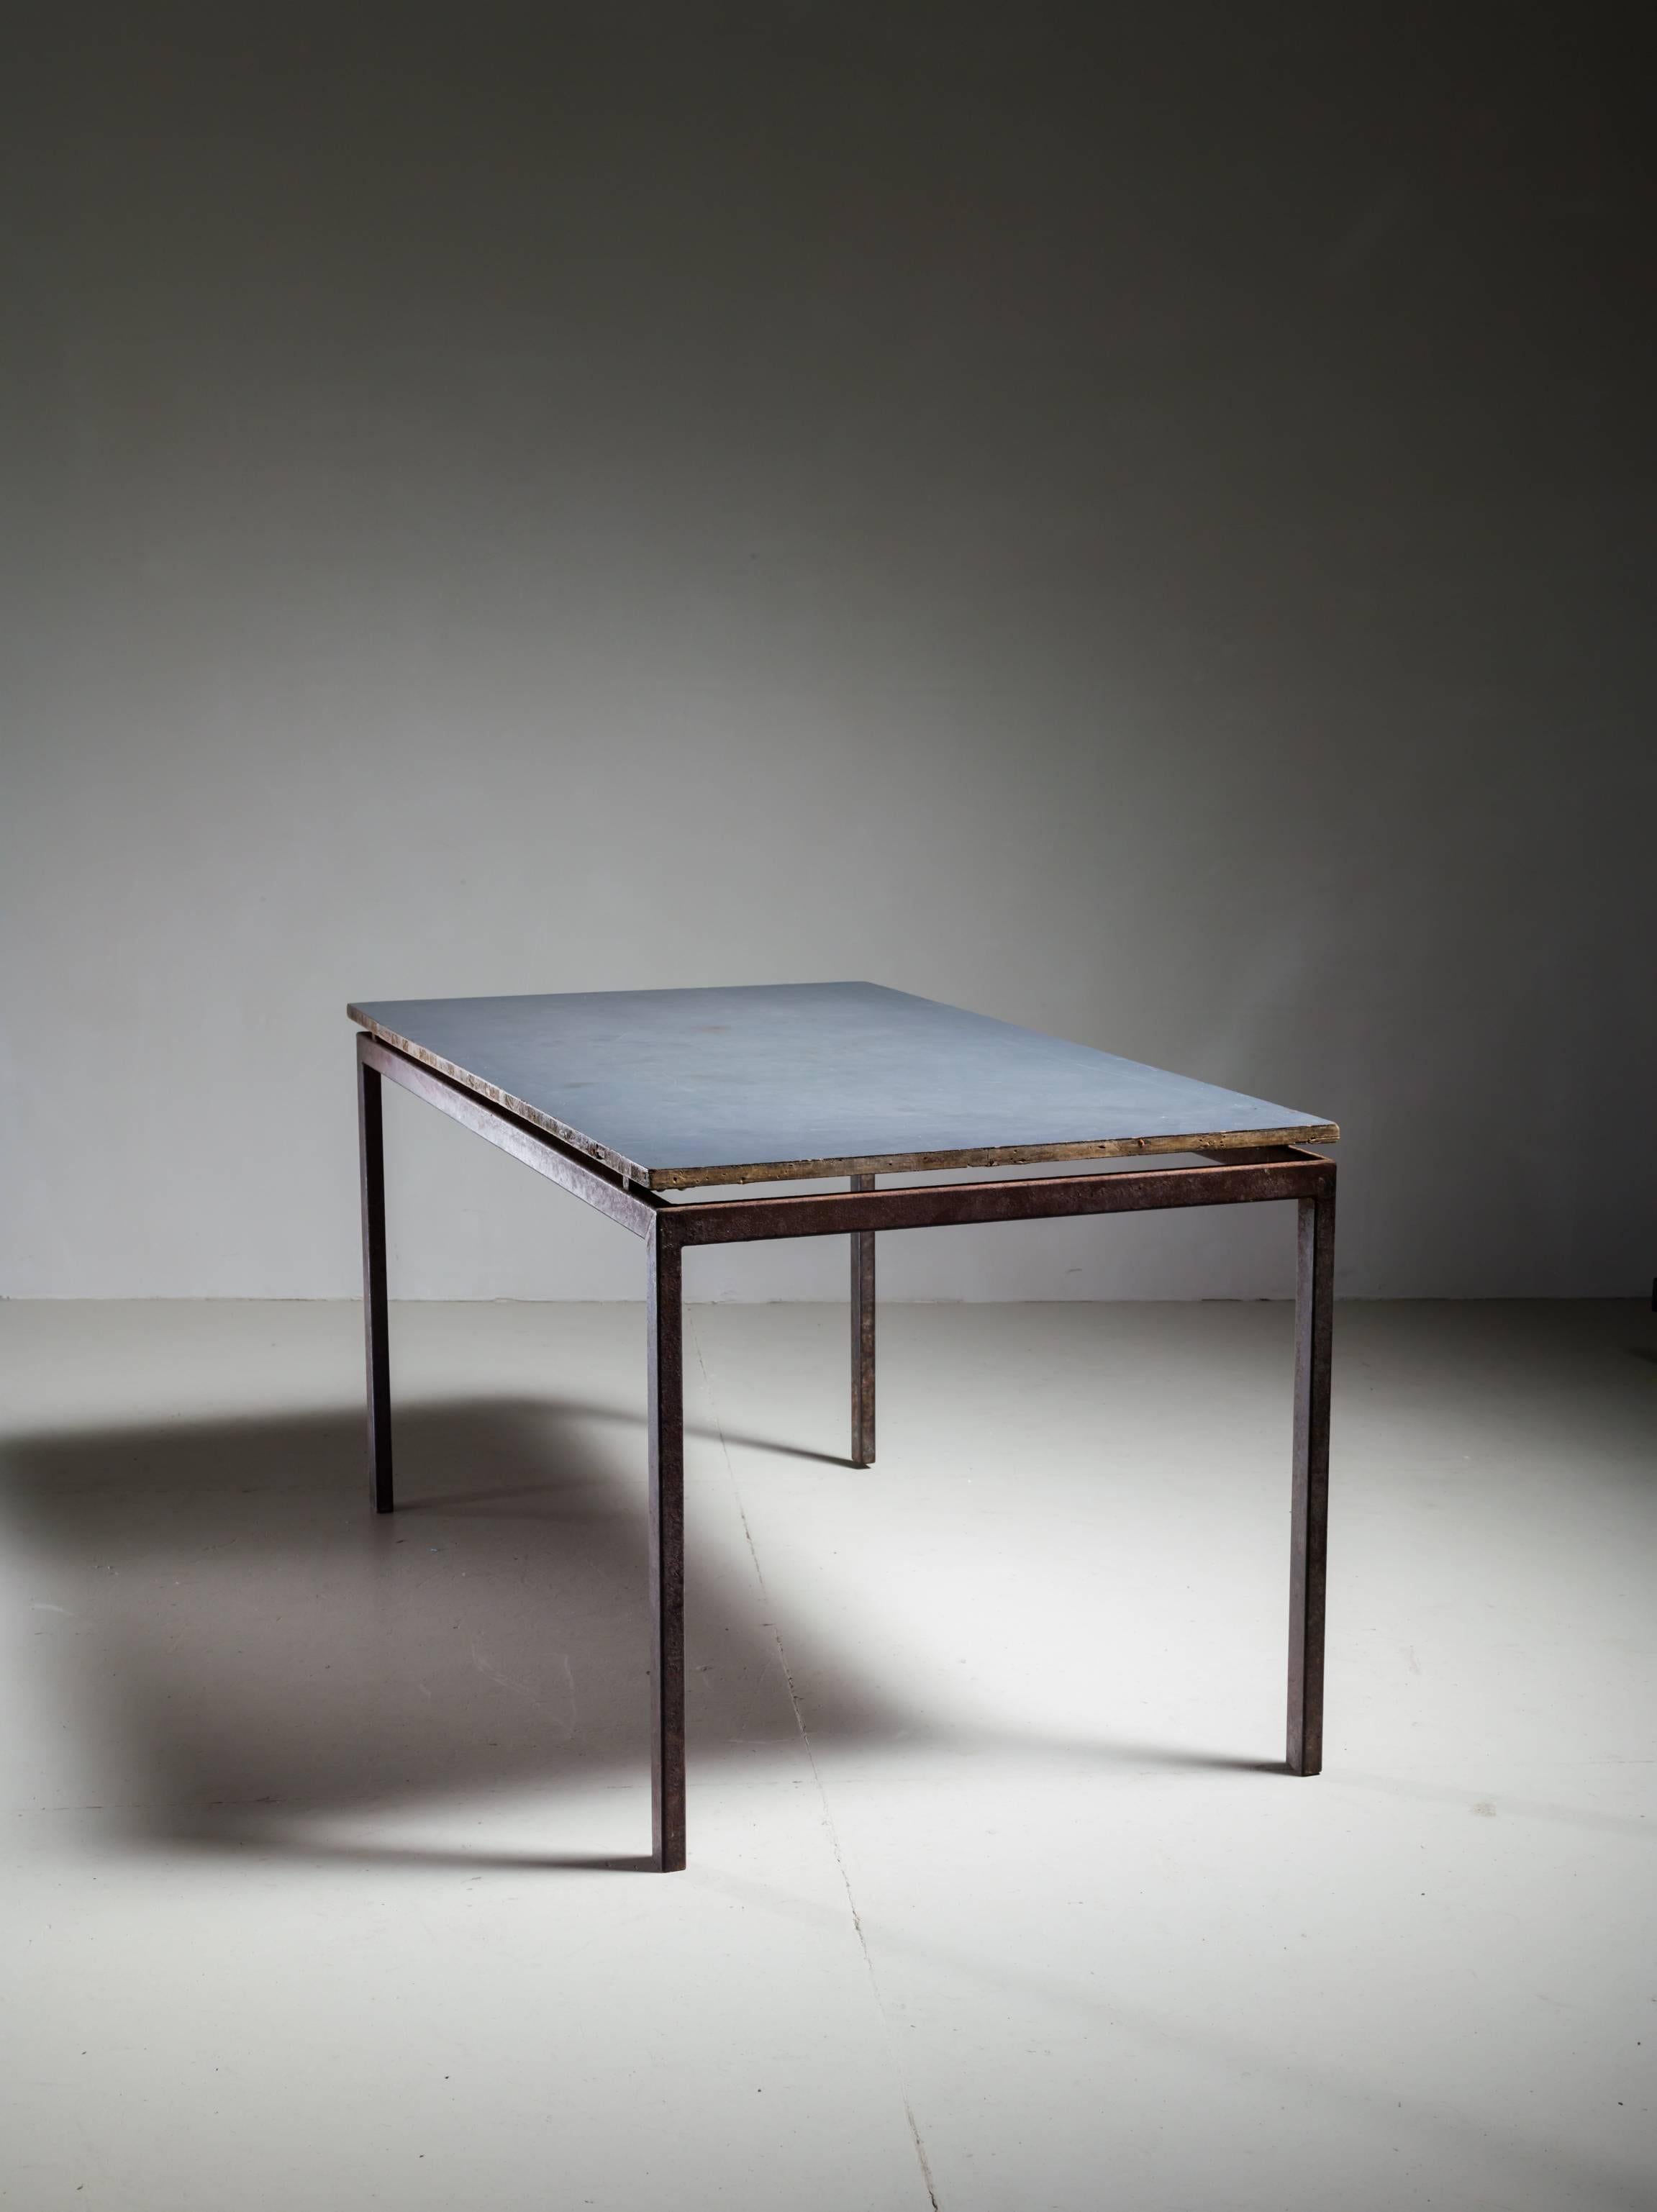 A table, designed by Charlotte Perriand for Cité Cansado, Mauritania. This table was designed in 1958 and editioned by Steph Simon, France.
The top, of plastic laminate on oak slats, rests, but almost seems to float, on a painted steel frame. This